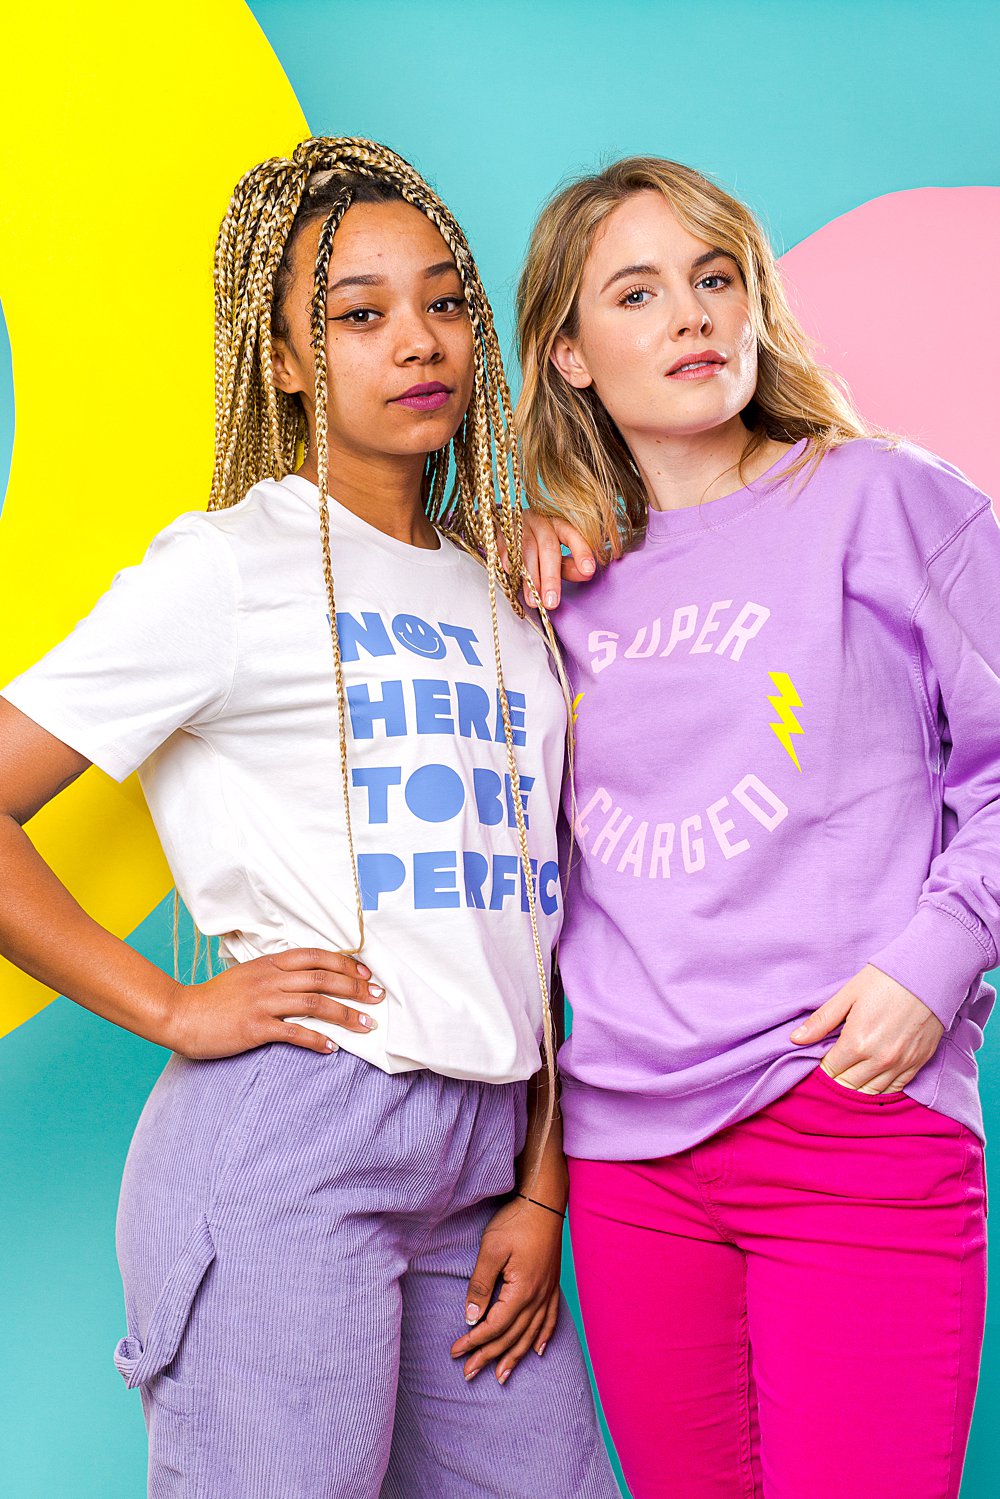 Colourful content creation for The Yay Makers. Creative product photography, art direction and styling by Marianne Taylor.